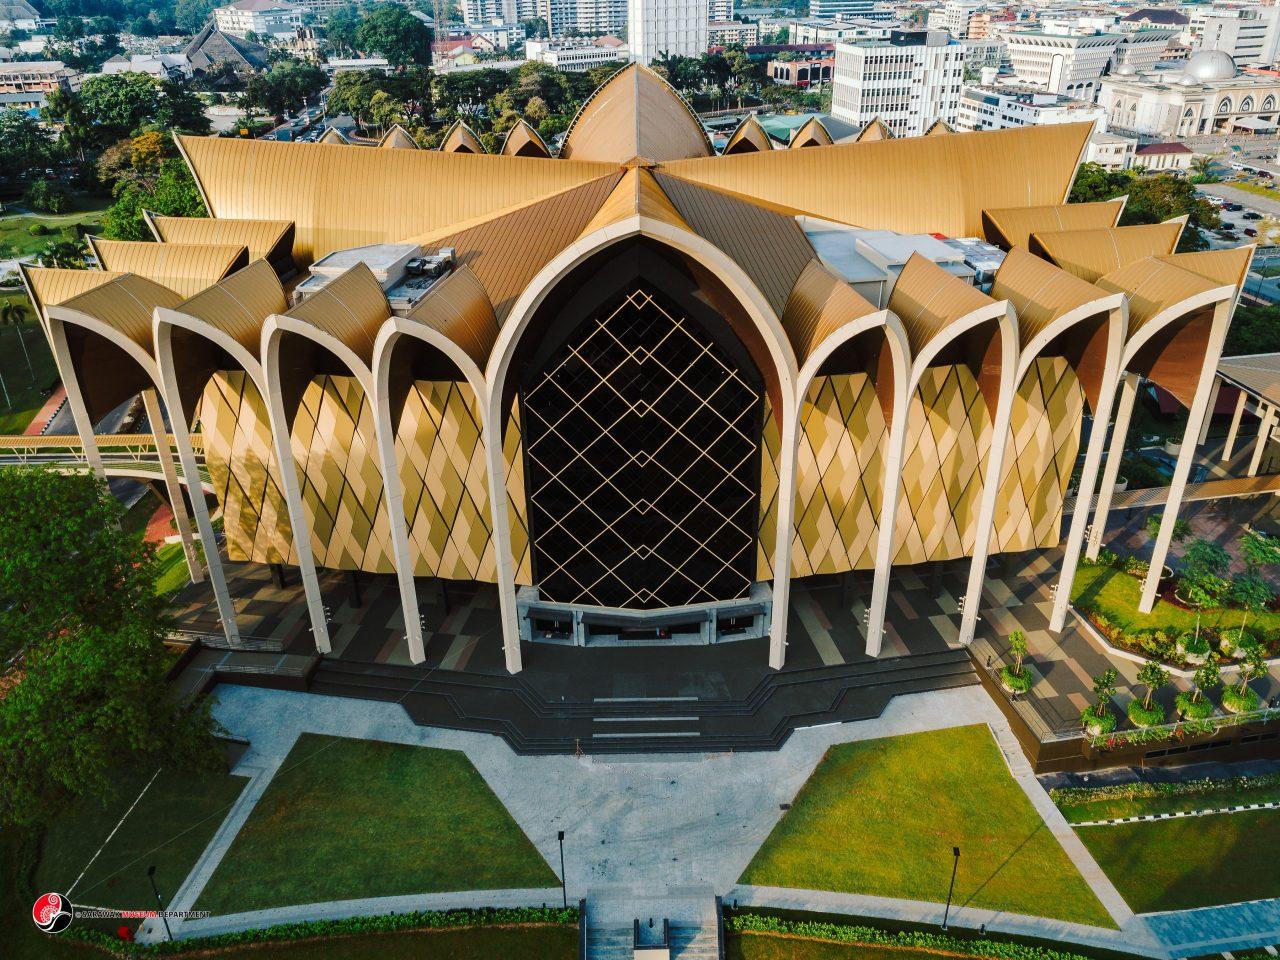 With a total floor space of some 31,000 sq ft, the Borneo Cultures Museum in Kuching will be the biggest museum in the country.